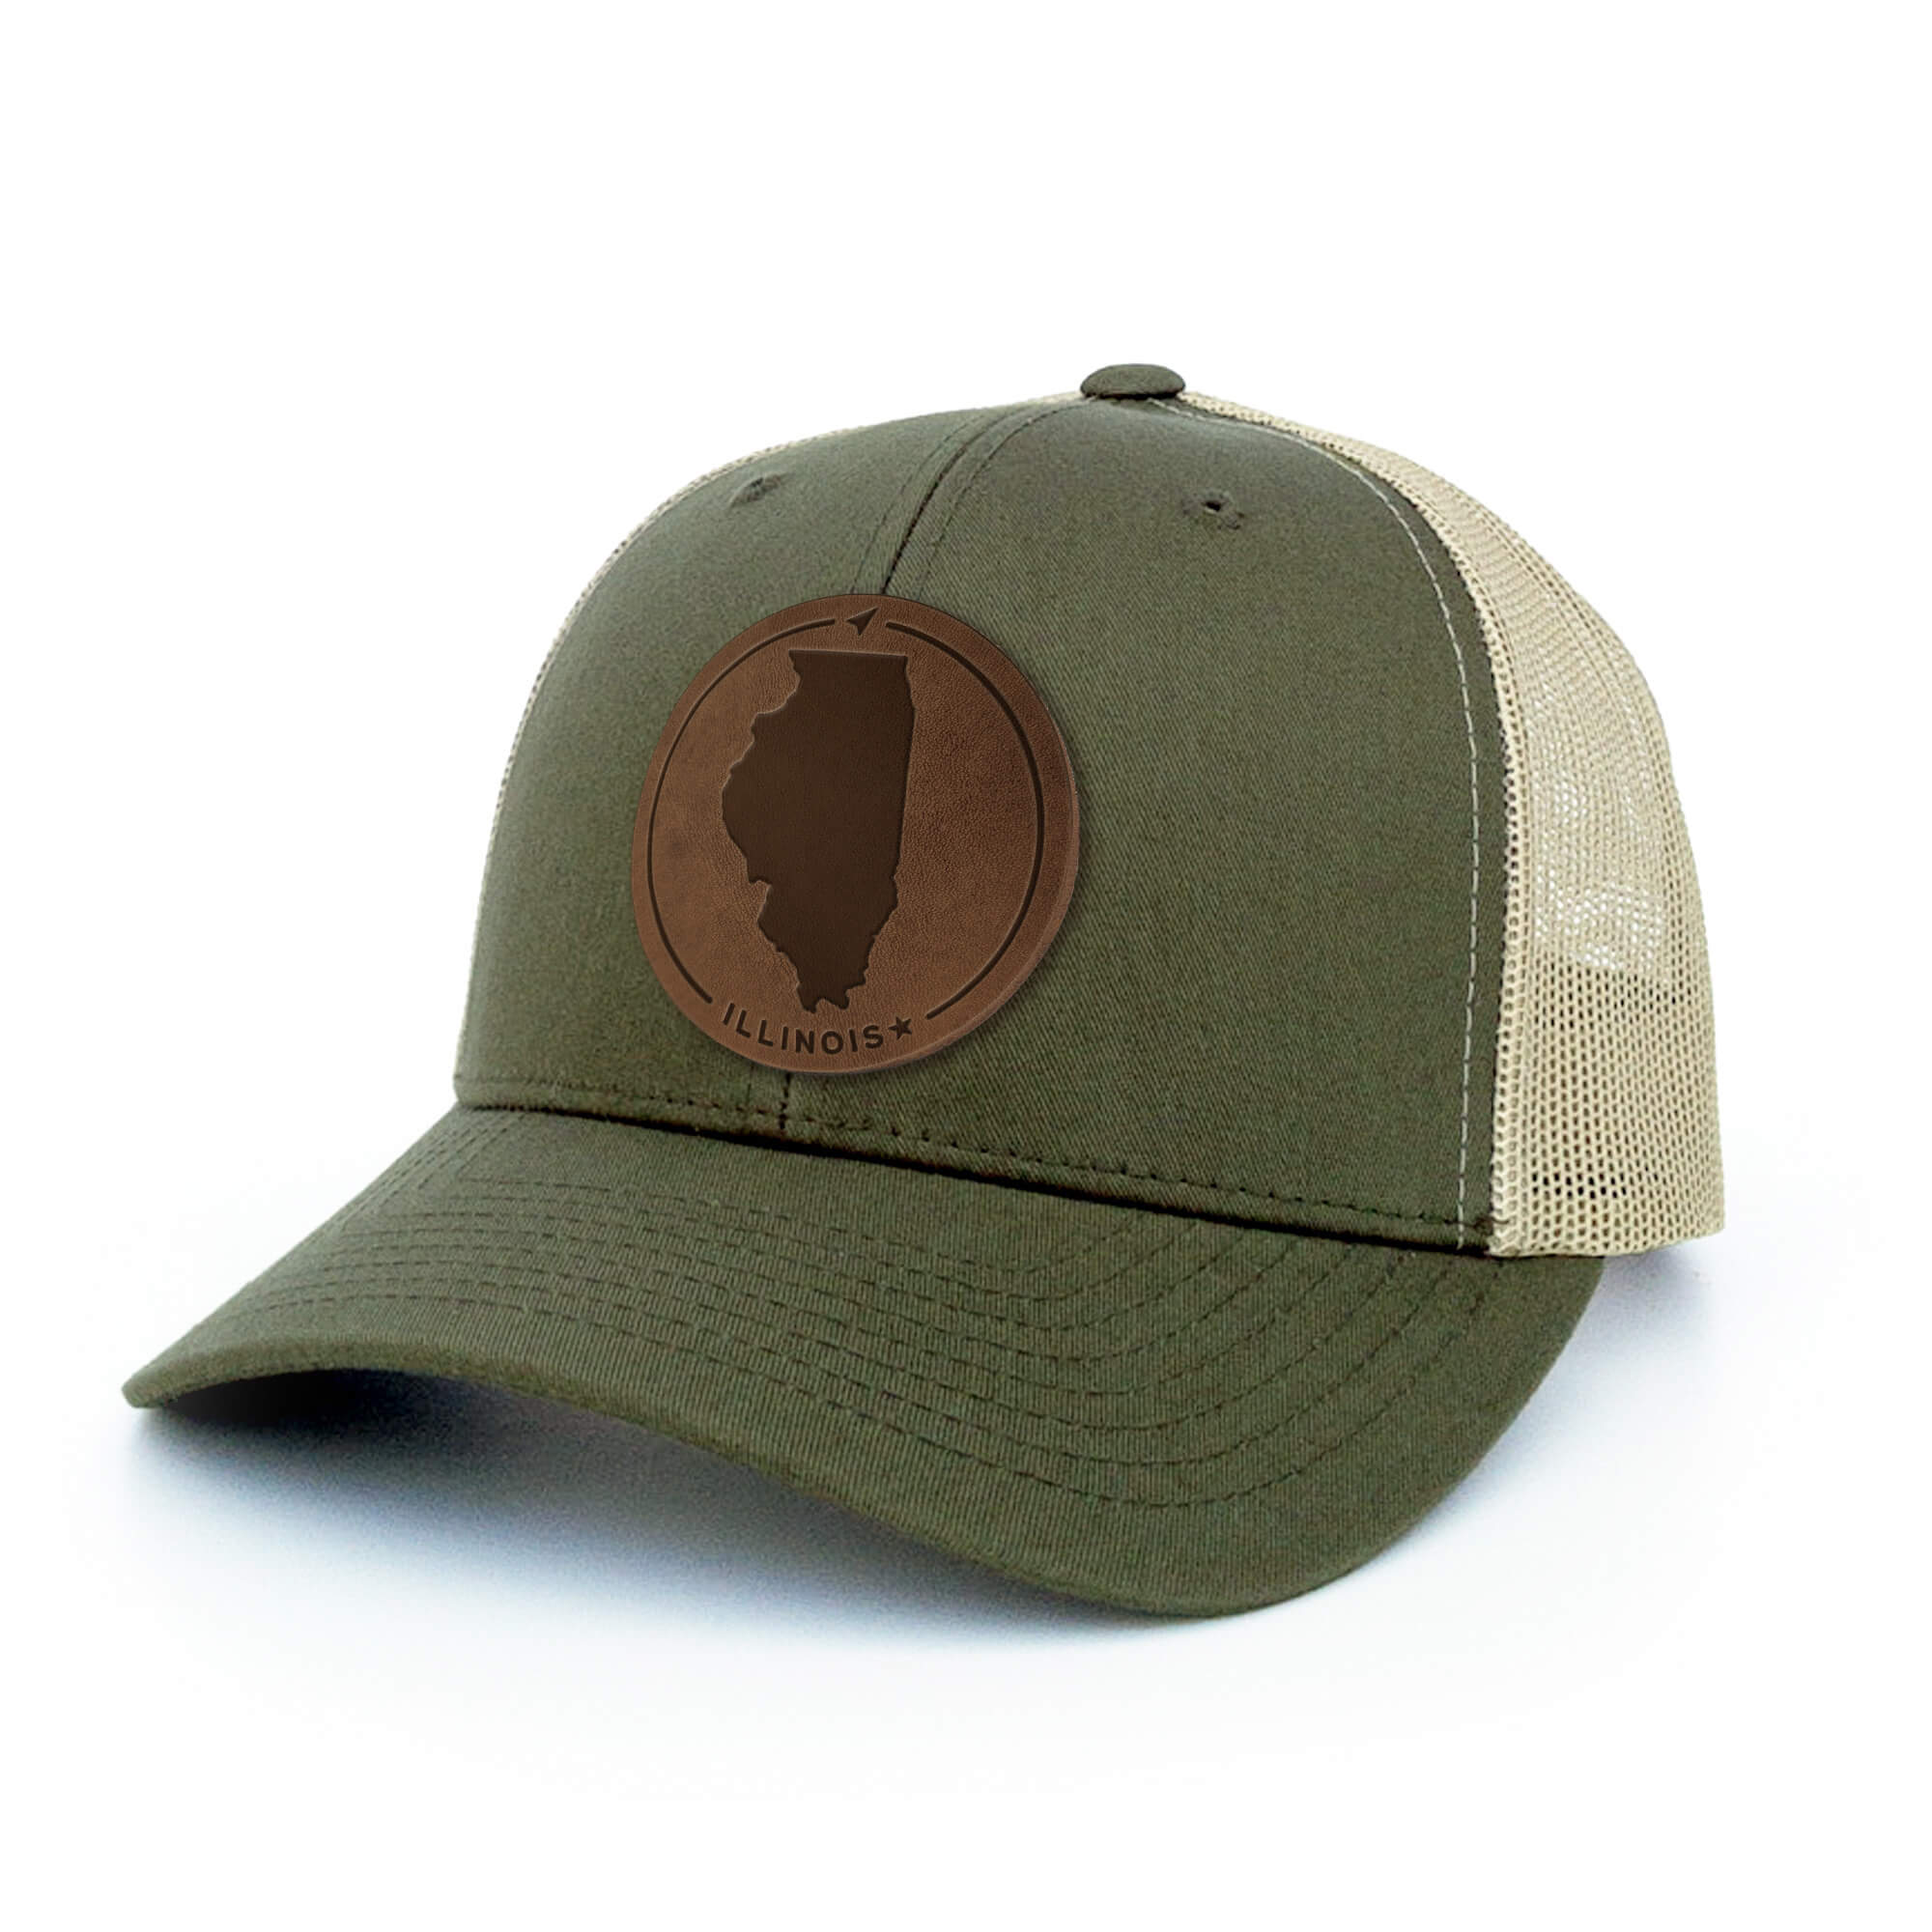 Moss Green and khaki trucker hat with full-grain leather patch of Illinois | BLACK-003-008, CHARC-003-008, NAVY-003-008, HGREY-003-008, MOSS-003-008, BROWN-003-008